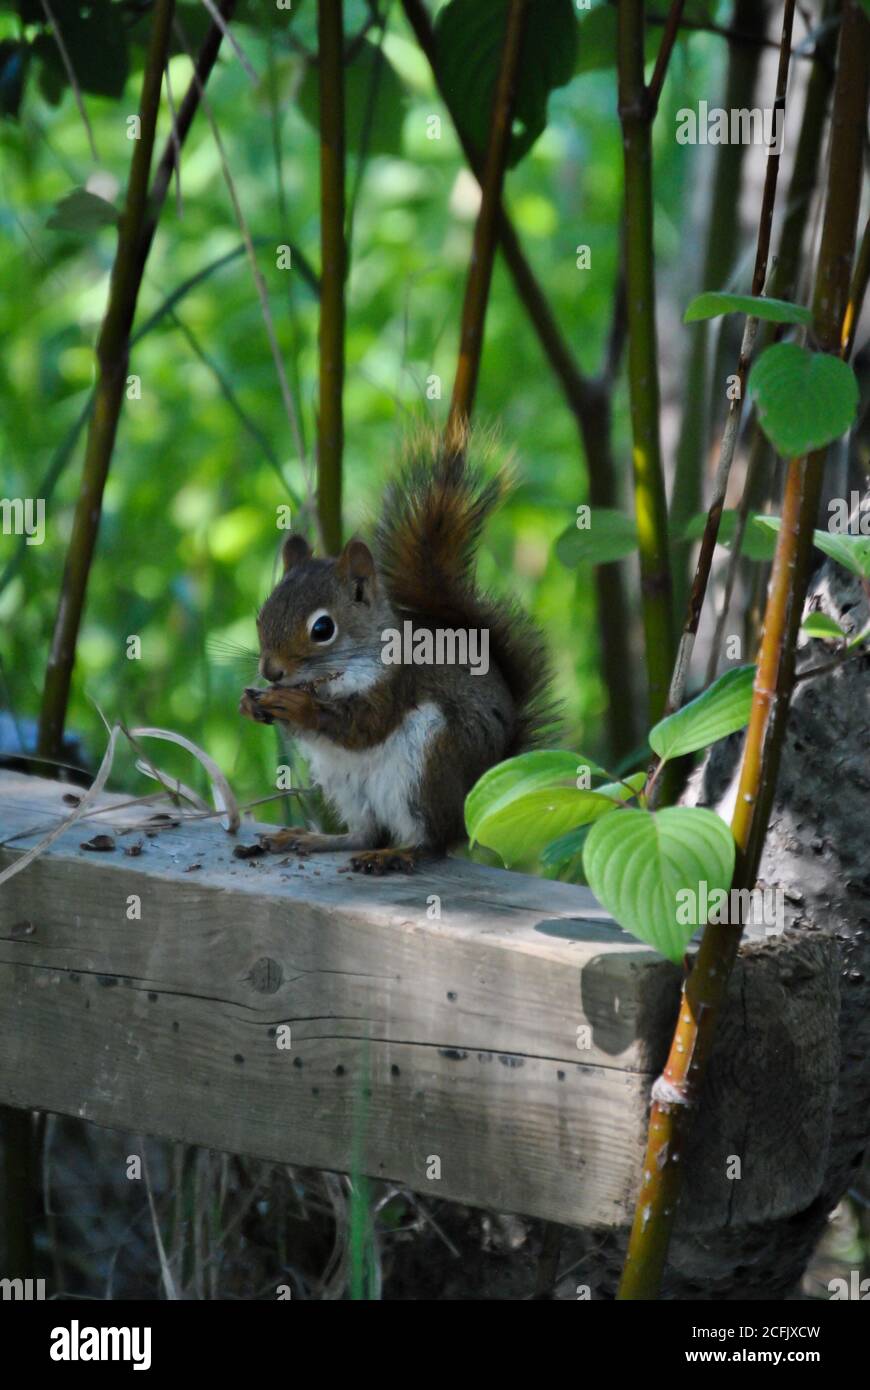 Red baby squirrel taken at Honey Harbour, Ontario CA Stock Photo